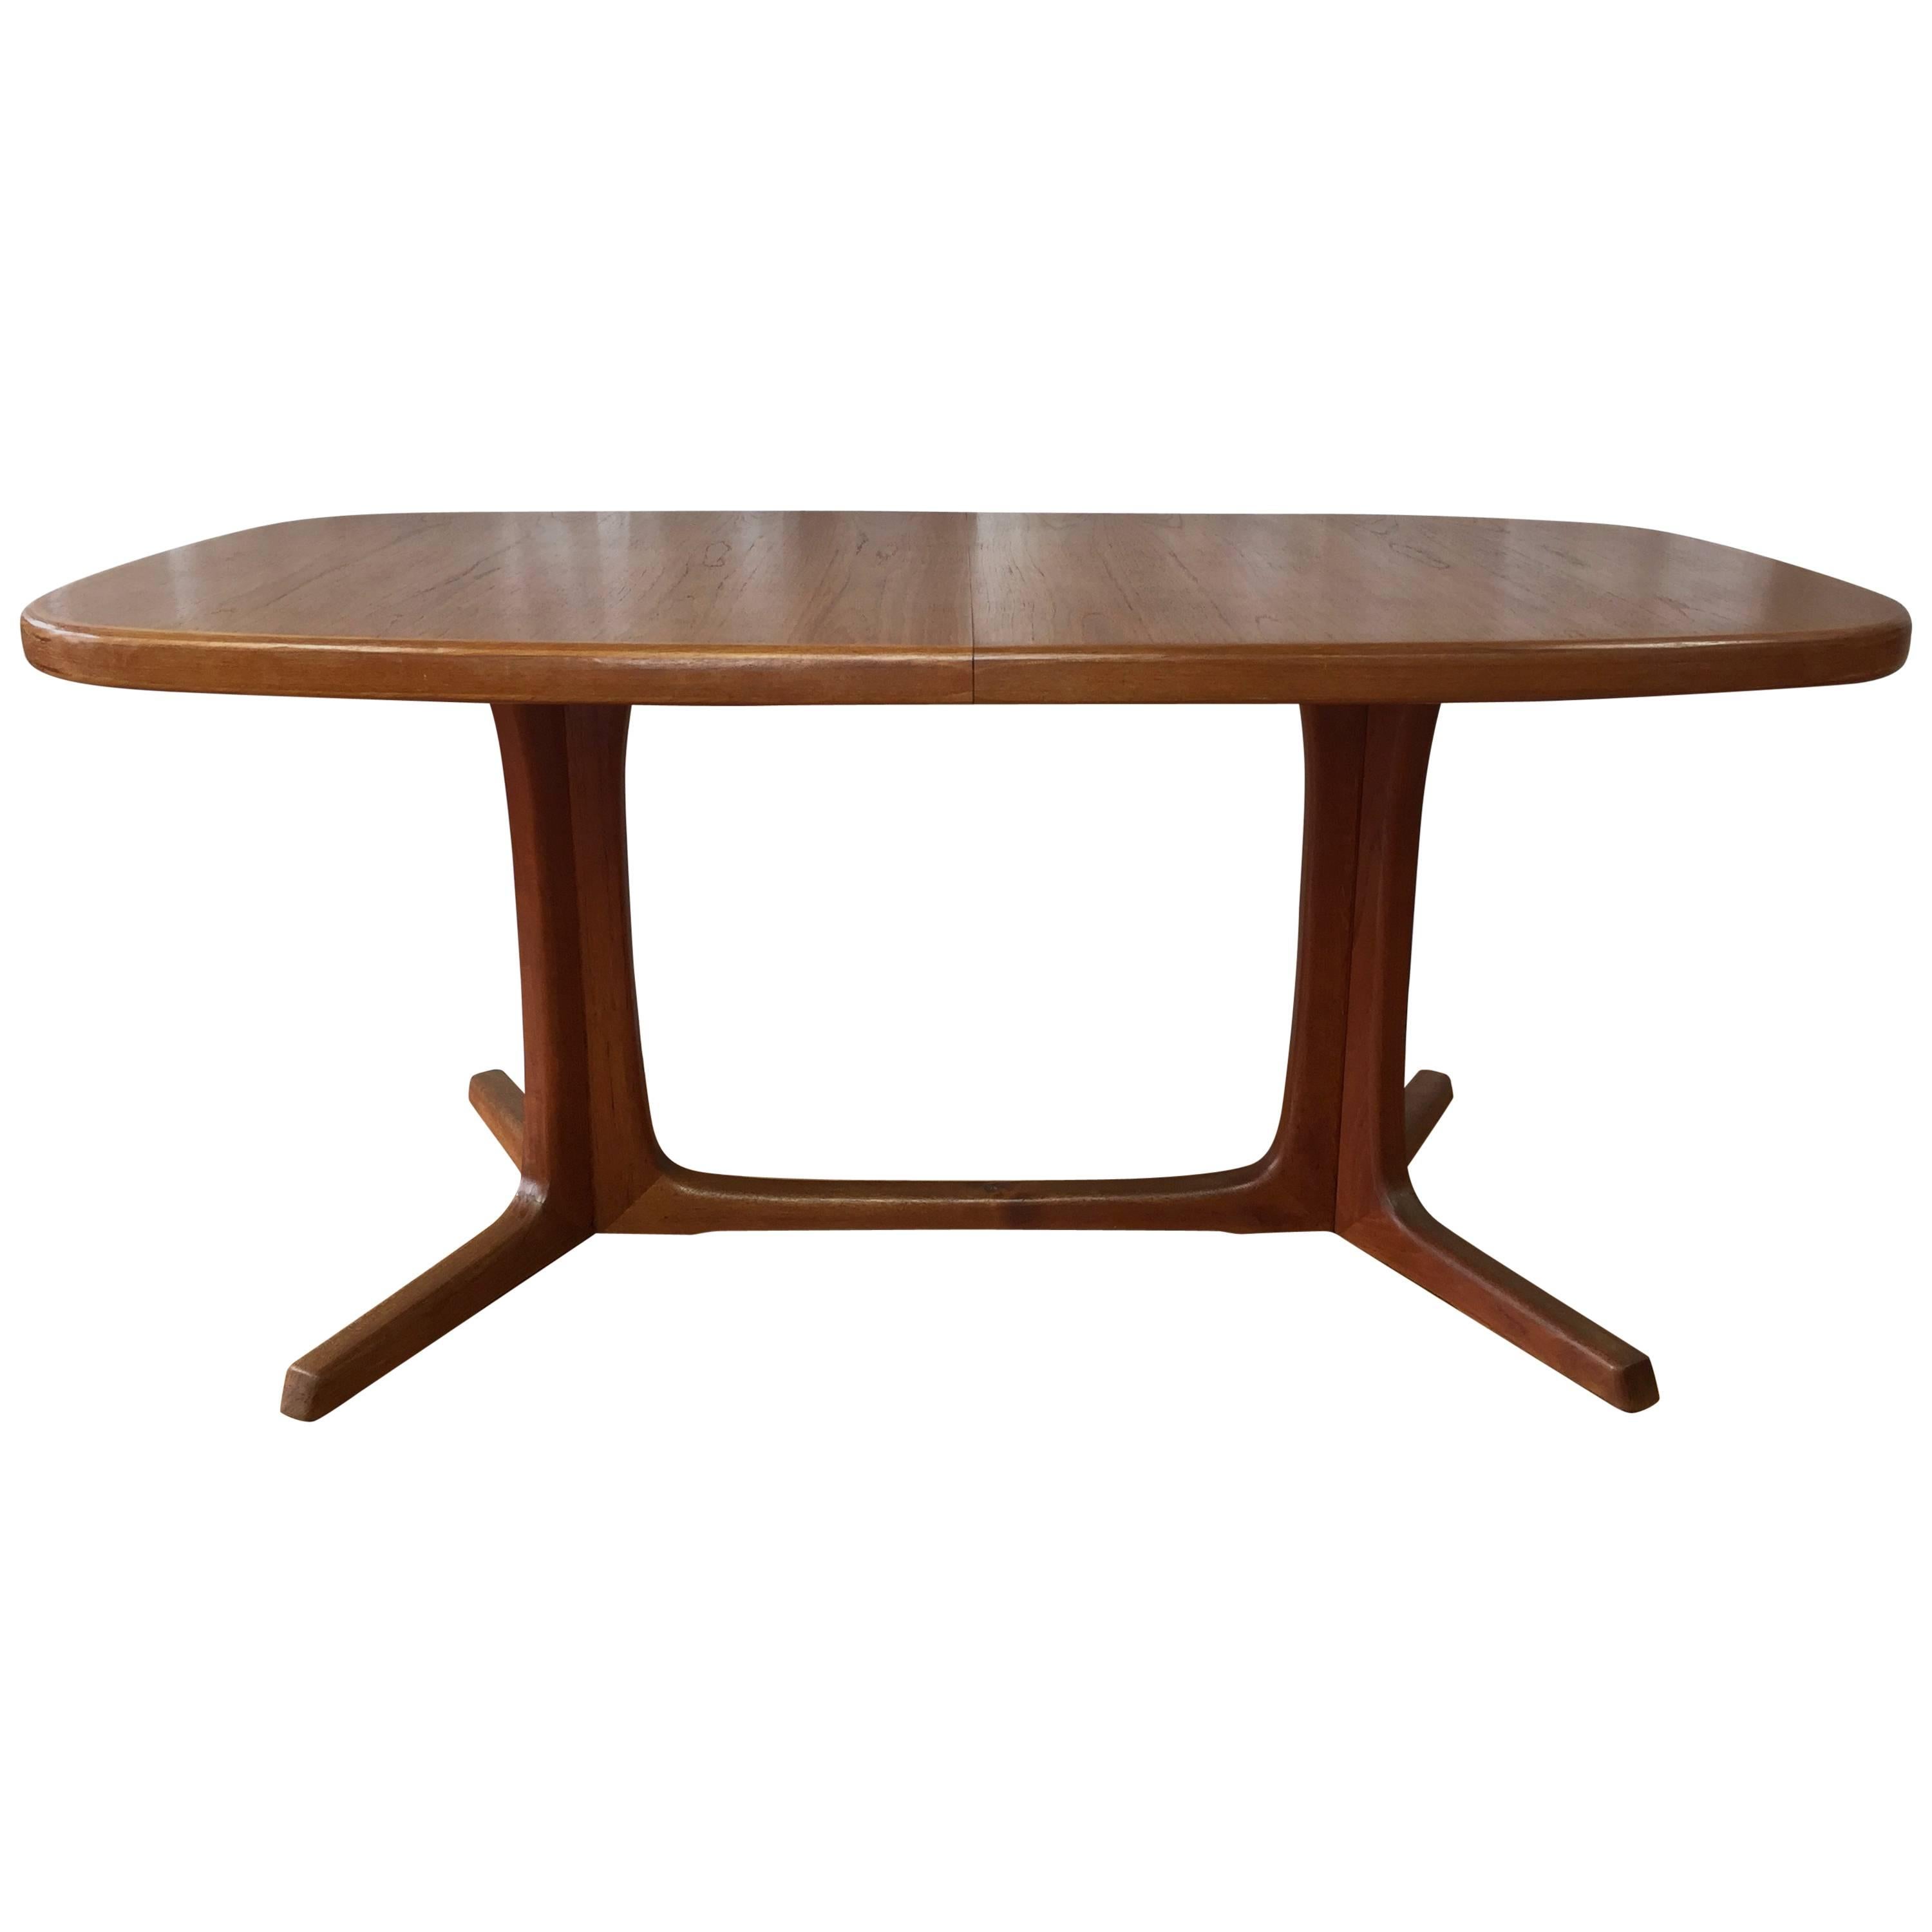 Niels Moller Teak Dining Table with Leaves